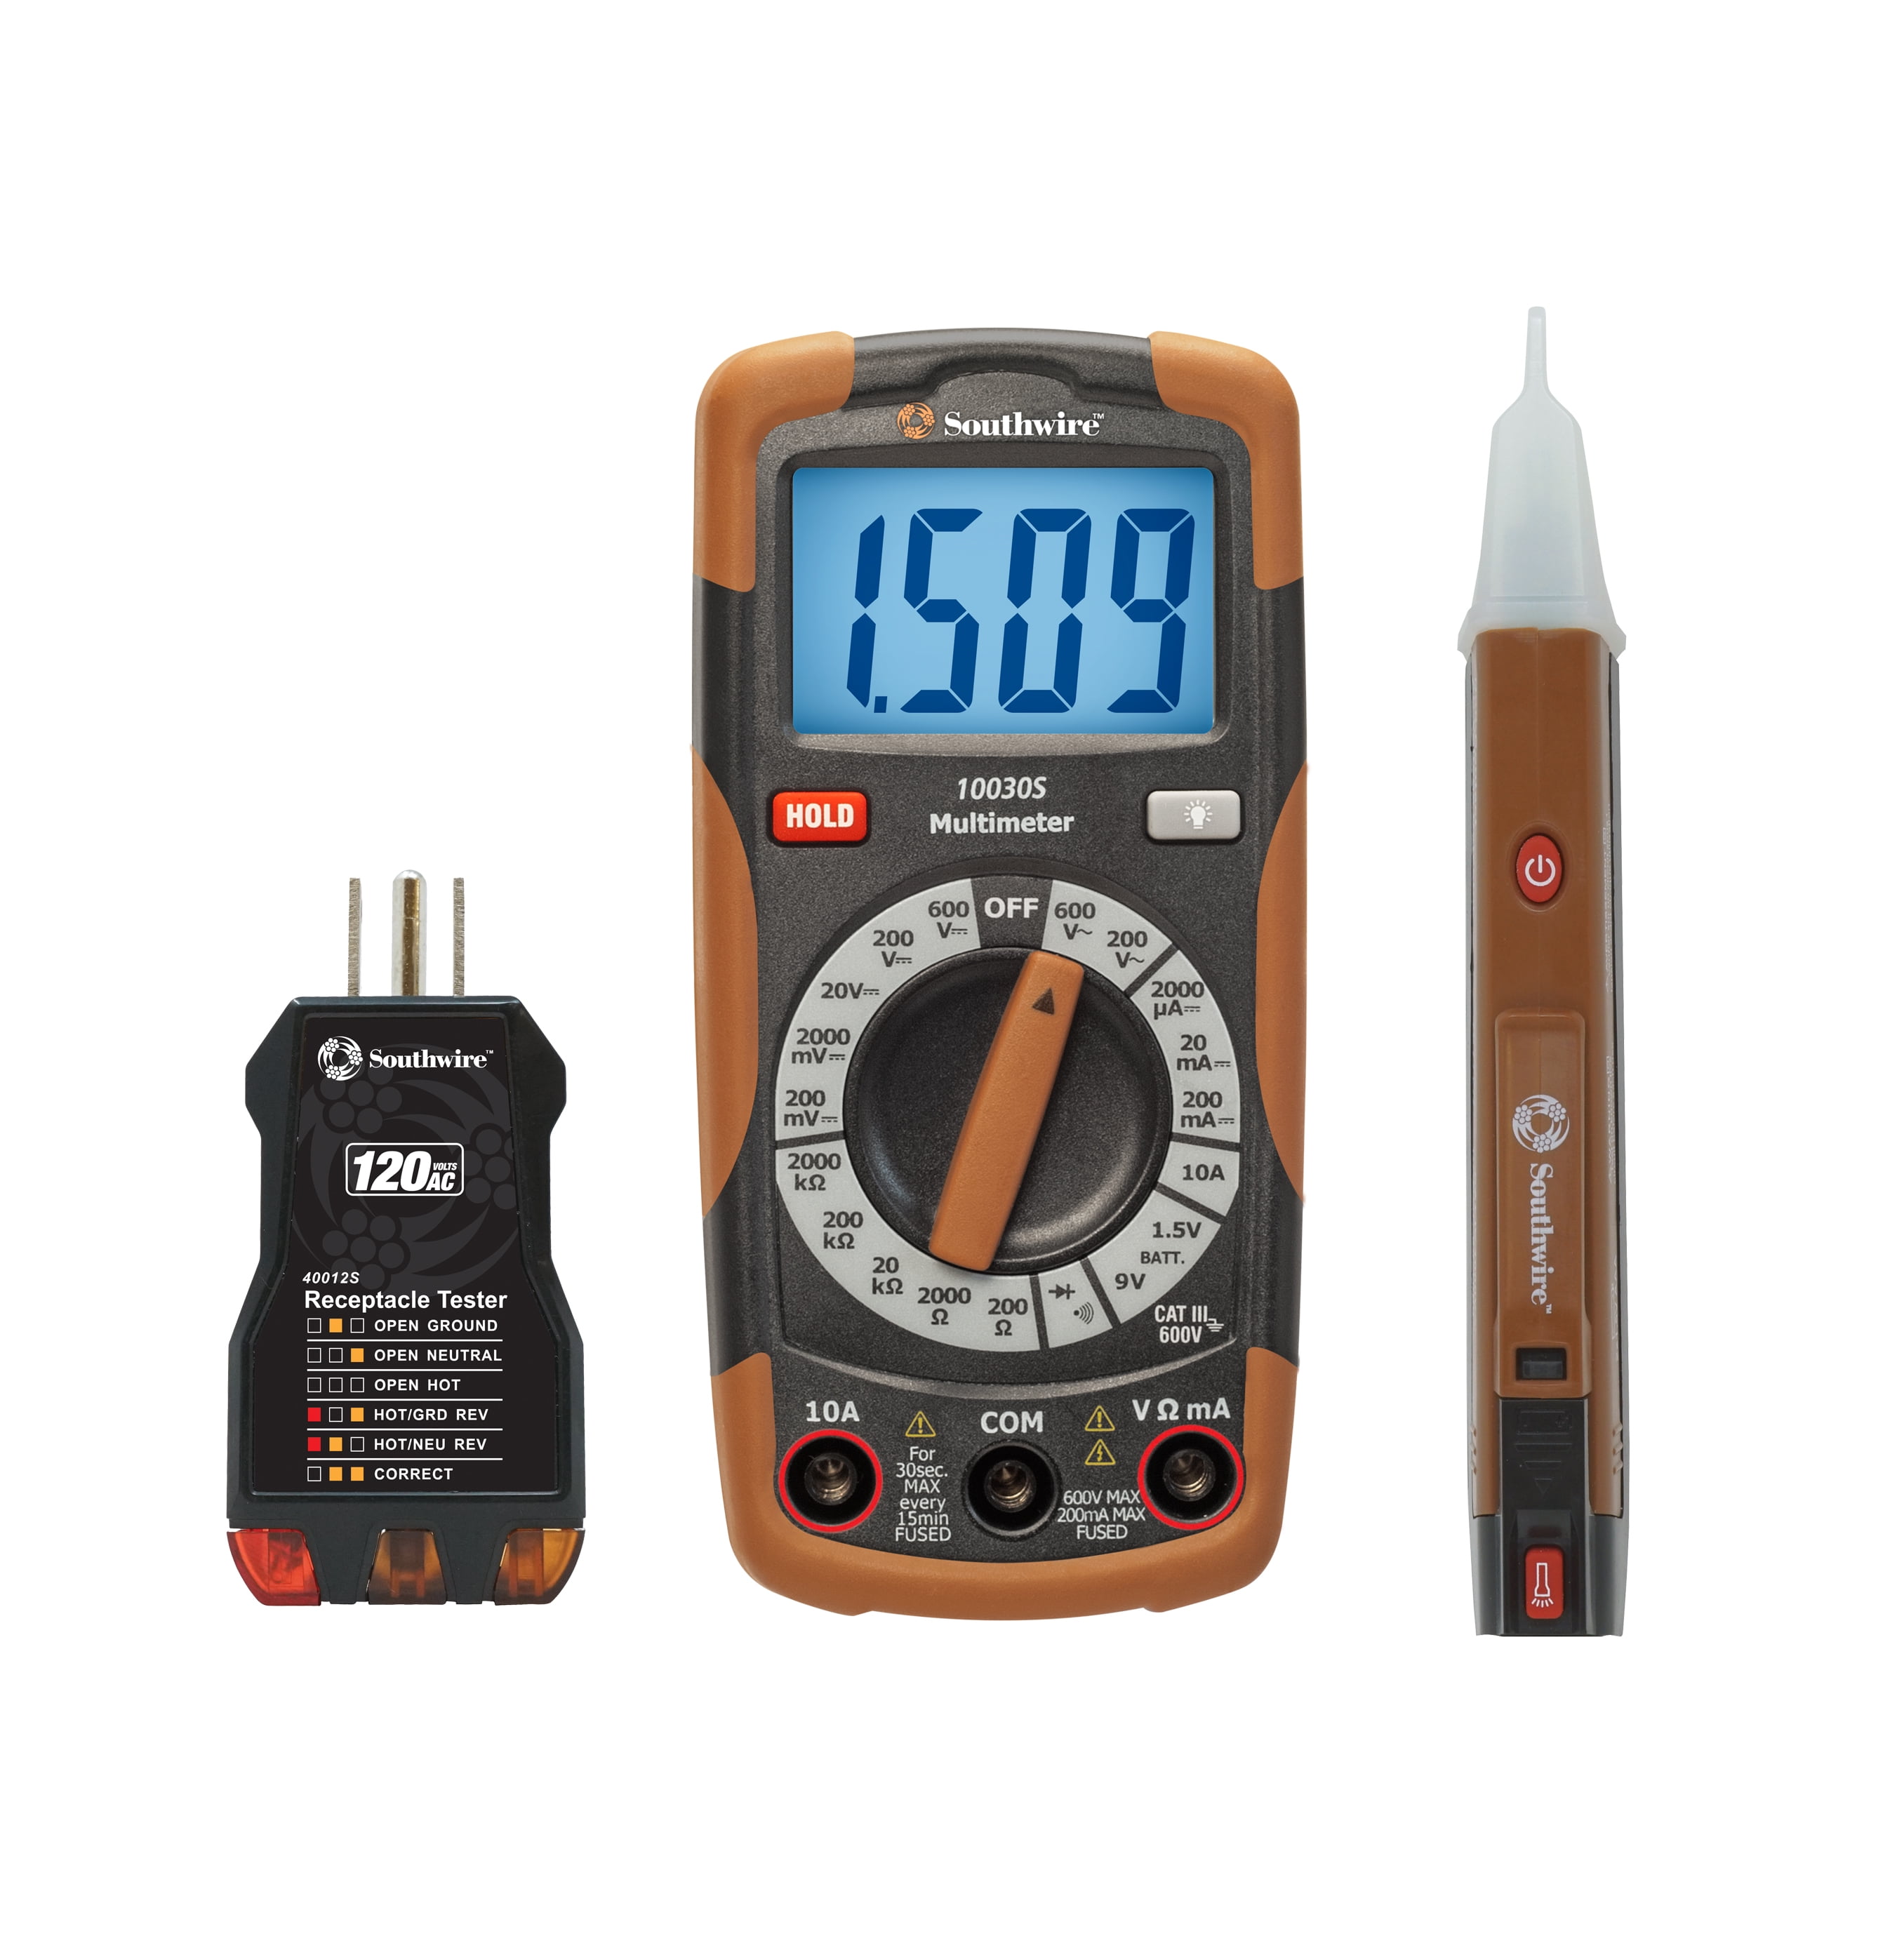 Southwire 10037K 3-Piece Electrical Test Kit with Full-Function